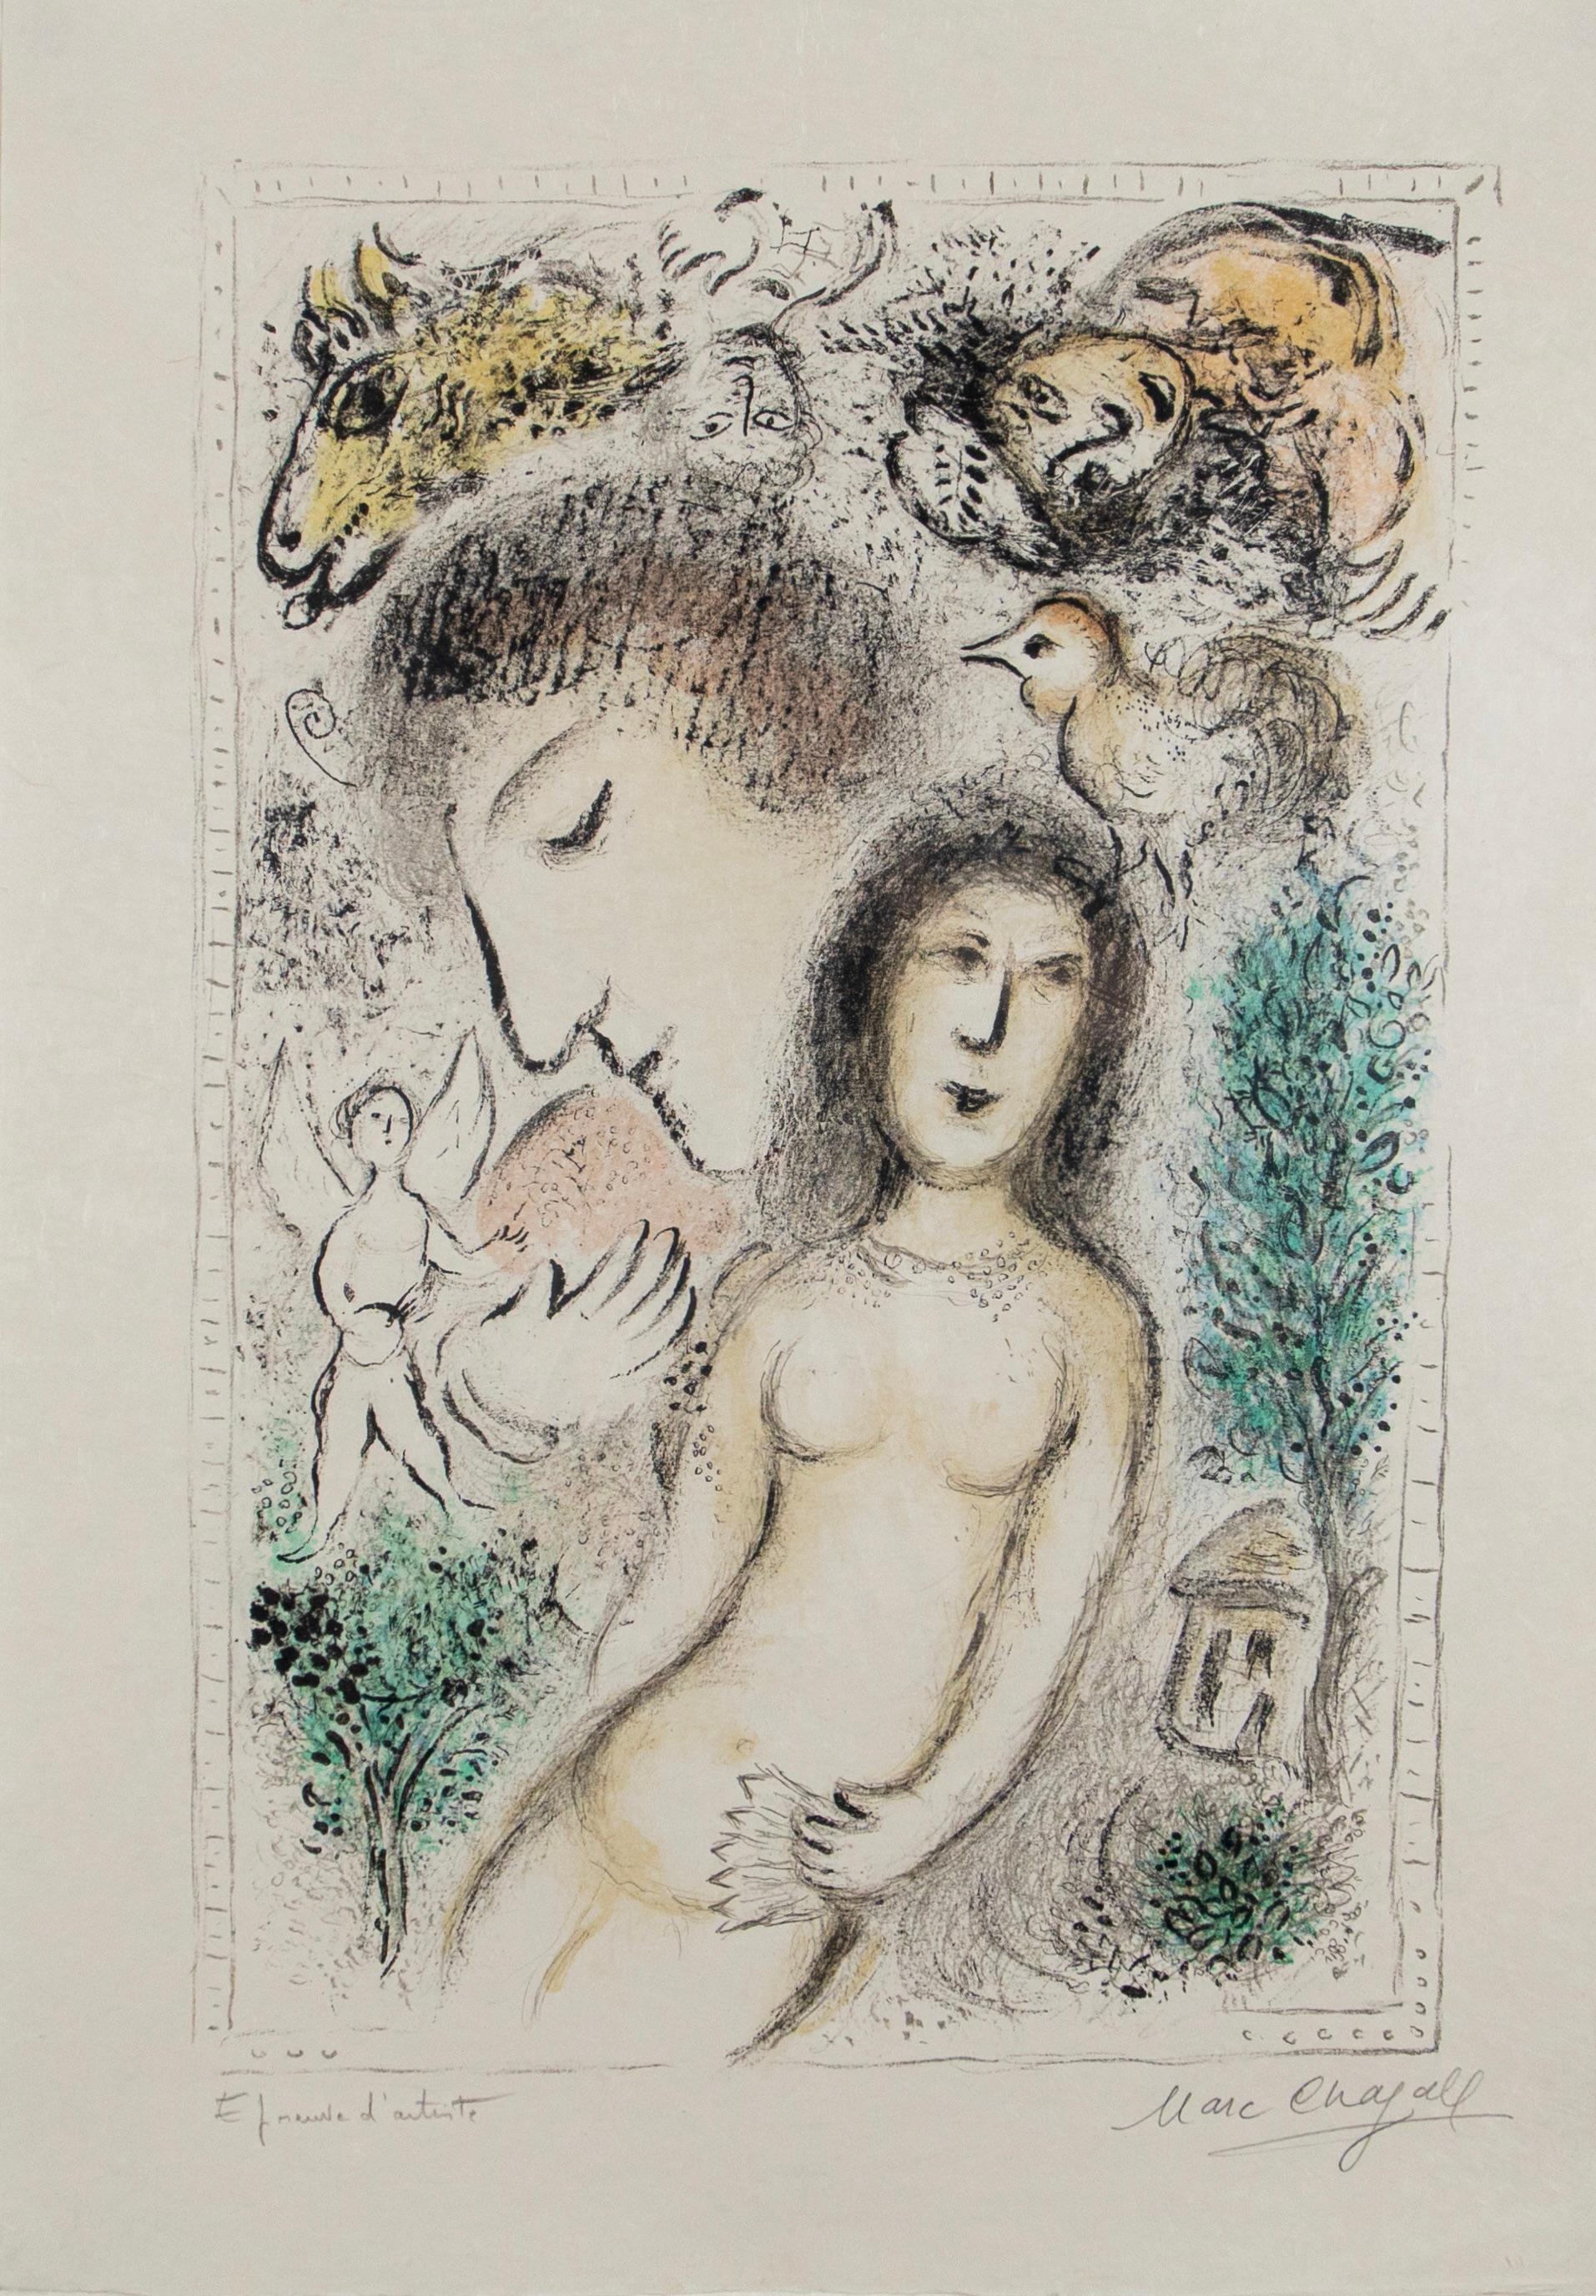 Marc Chagall Nude Print - “Le Nu” The Nude - Color lithograph 1978 - Framed - Signed - angel, bird